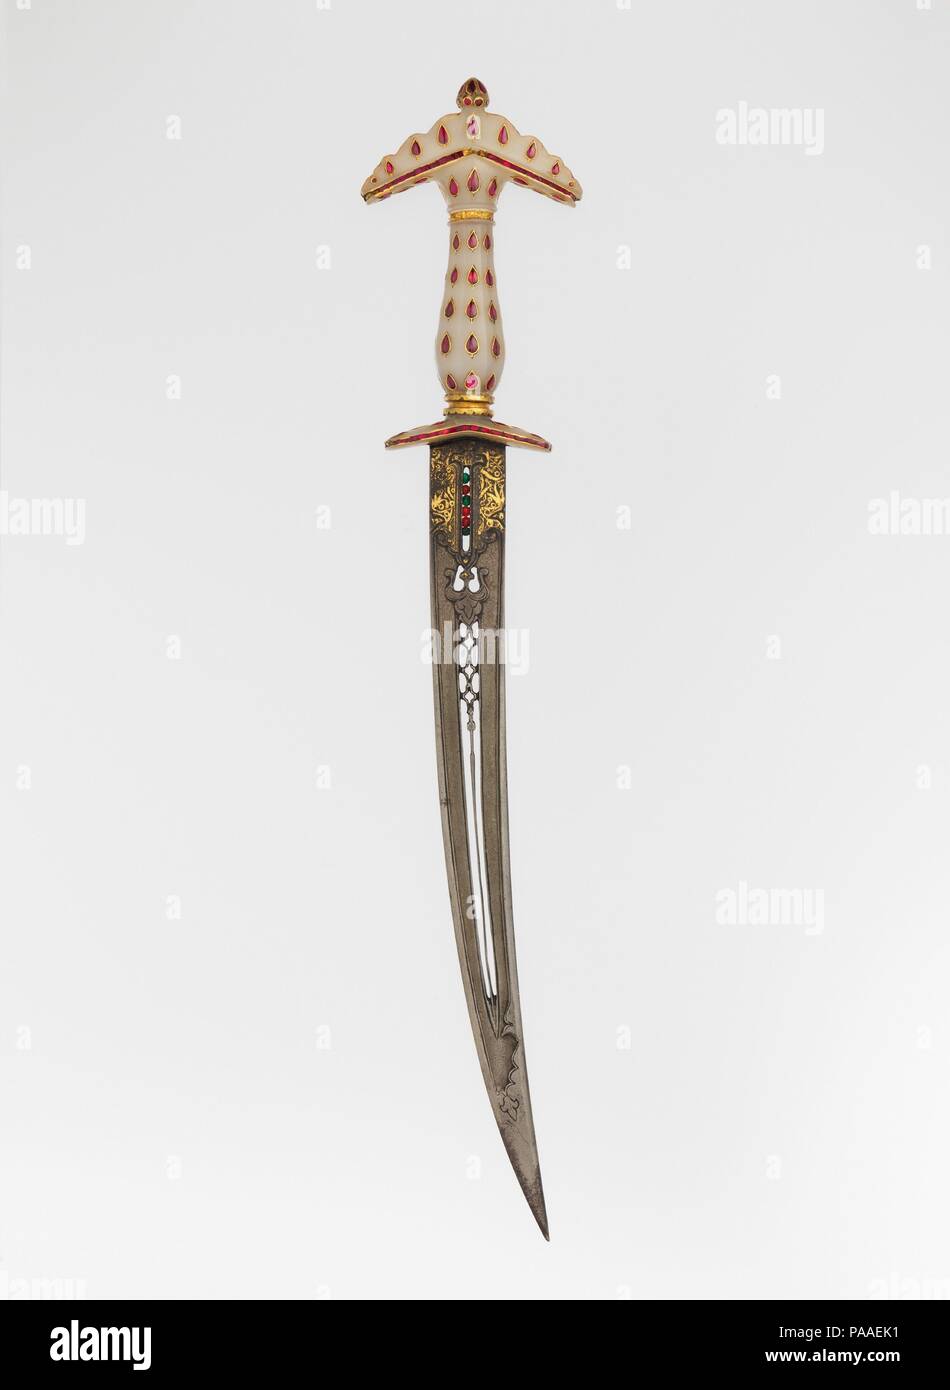 Dagger with Sheath. Culture: Hilt, Indian, Mughal; blade, Turkish or Indian. Dimensions: L. 17 in.  ( 43.18 cm). Date: late 17th century. Museum: Metropolitan Museum of Art, New York, USA. Stock Photo